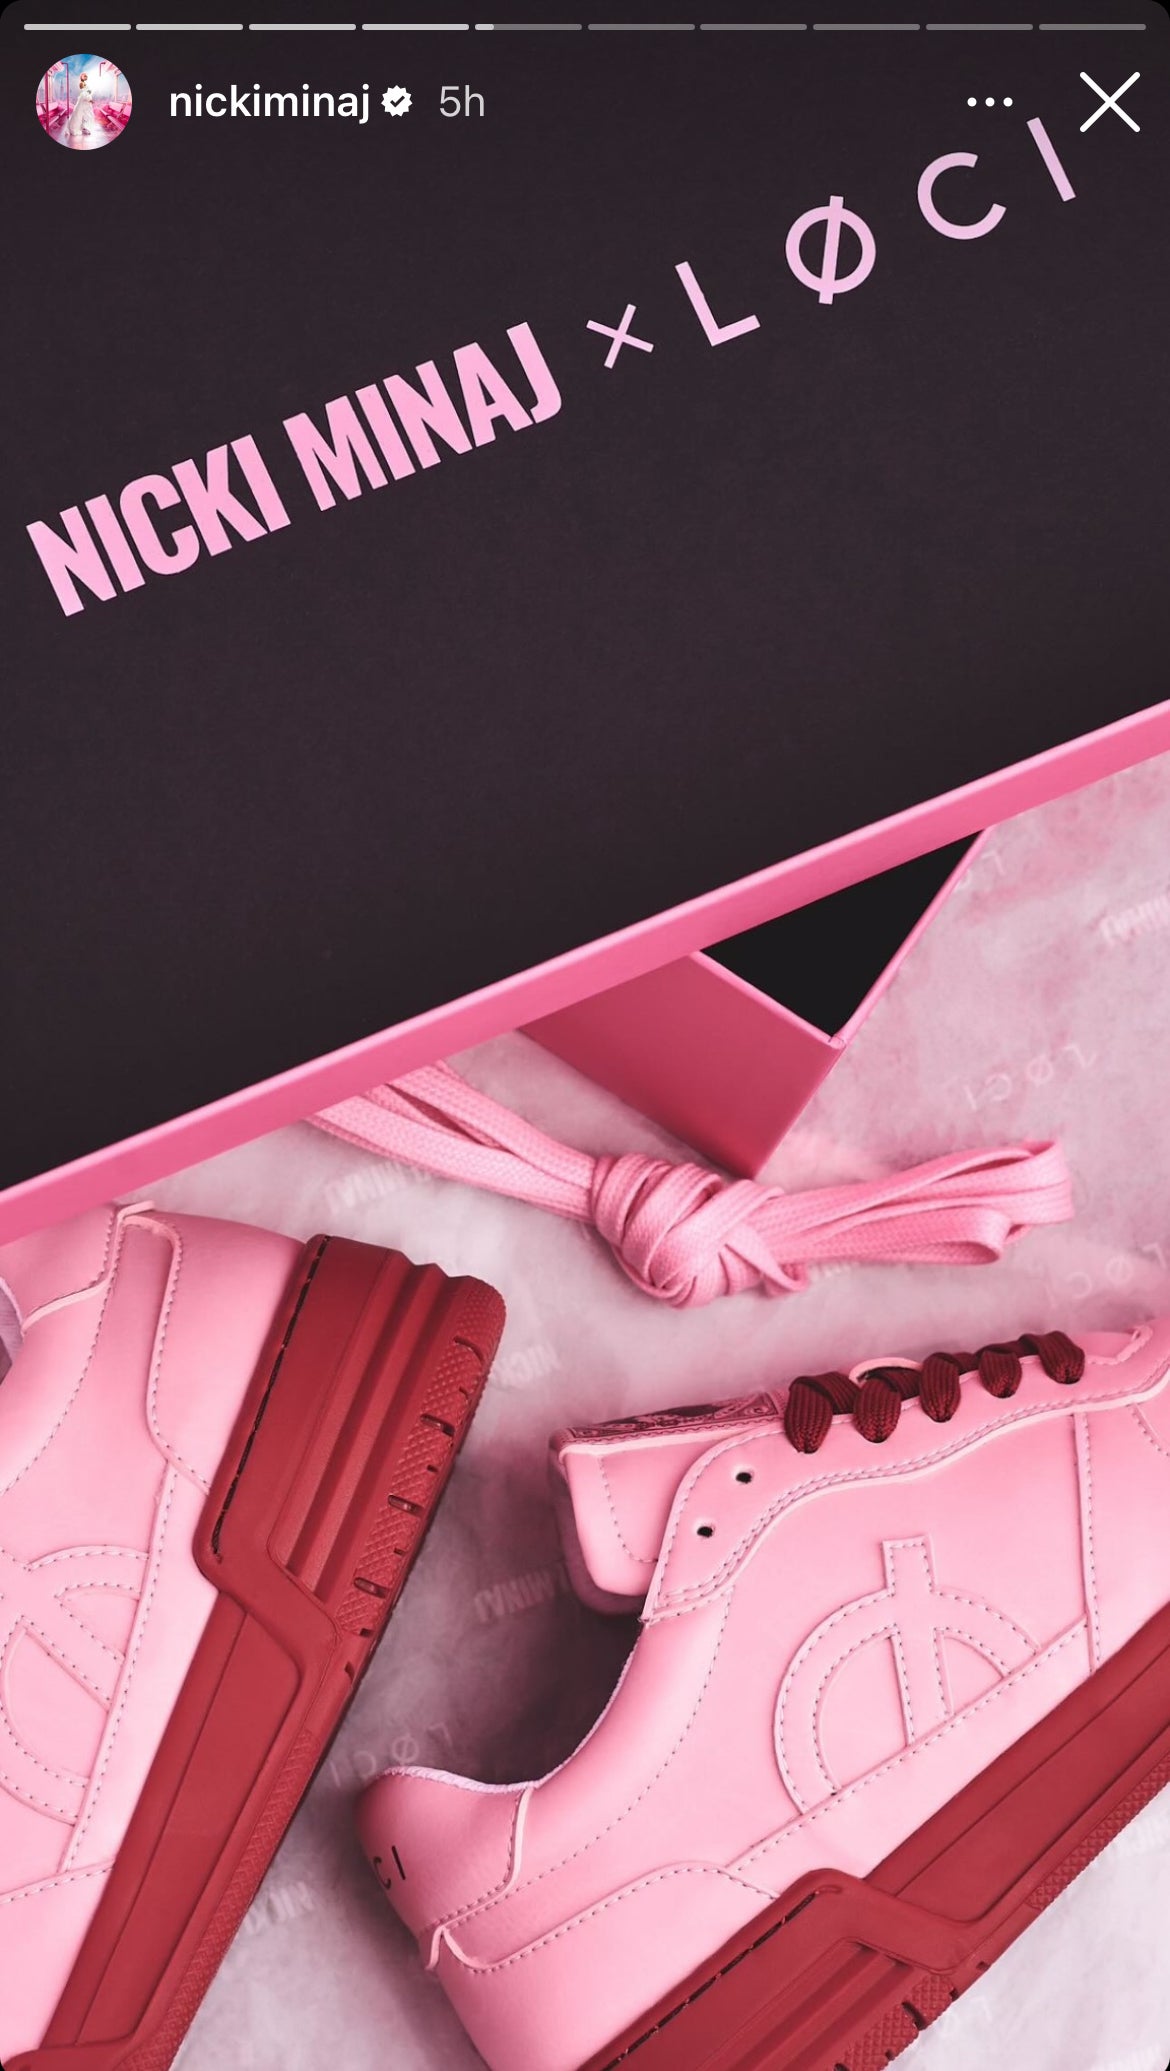 In Case You Missed It: Nicki Minaj Releases A Sneaker Collab, Karreuche Wears Dolce & Gabbana, And More